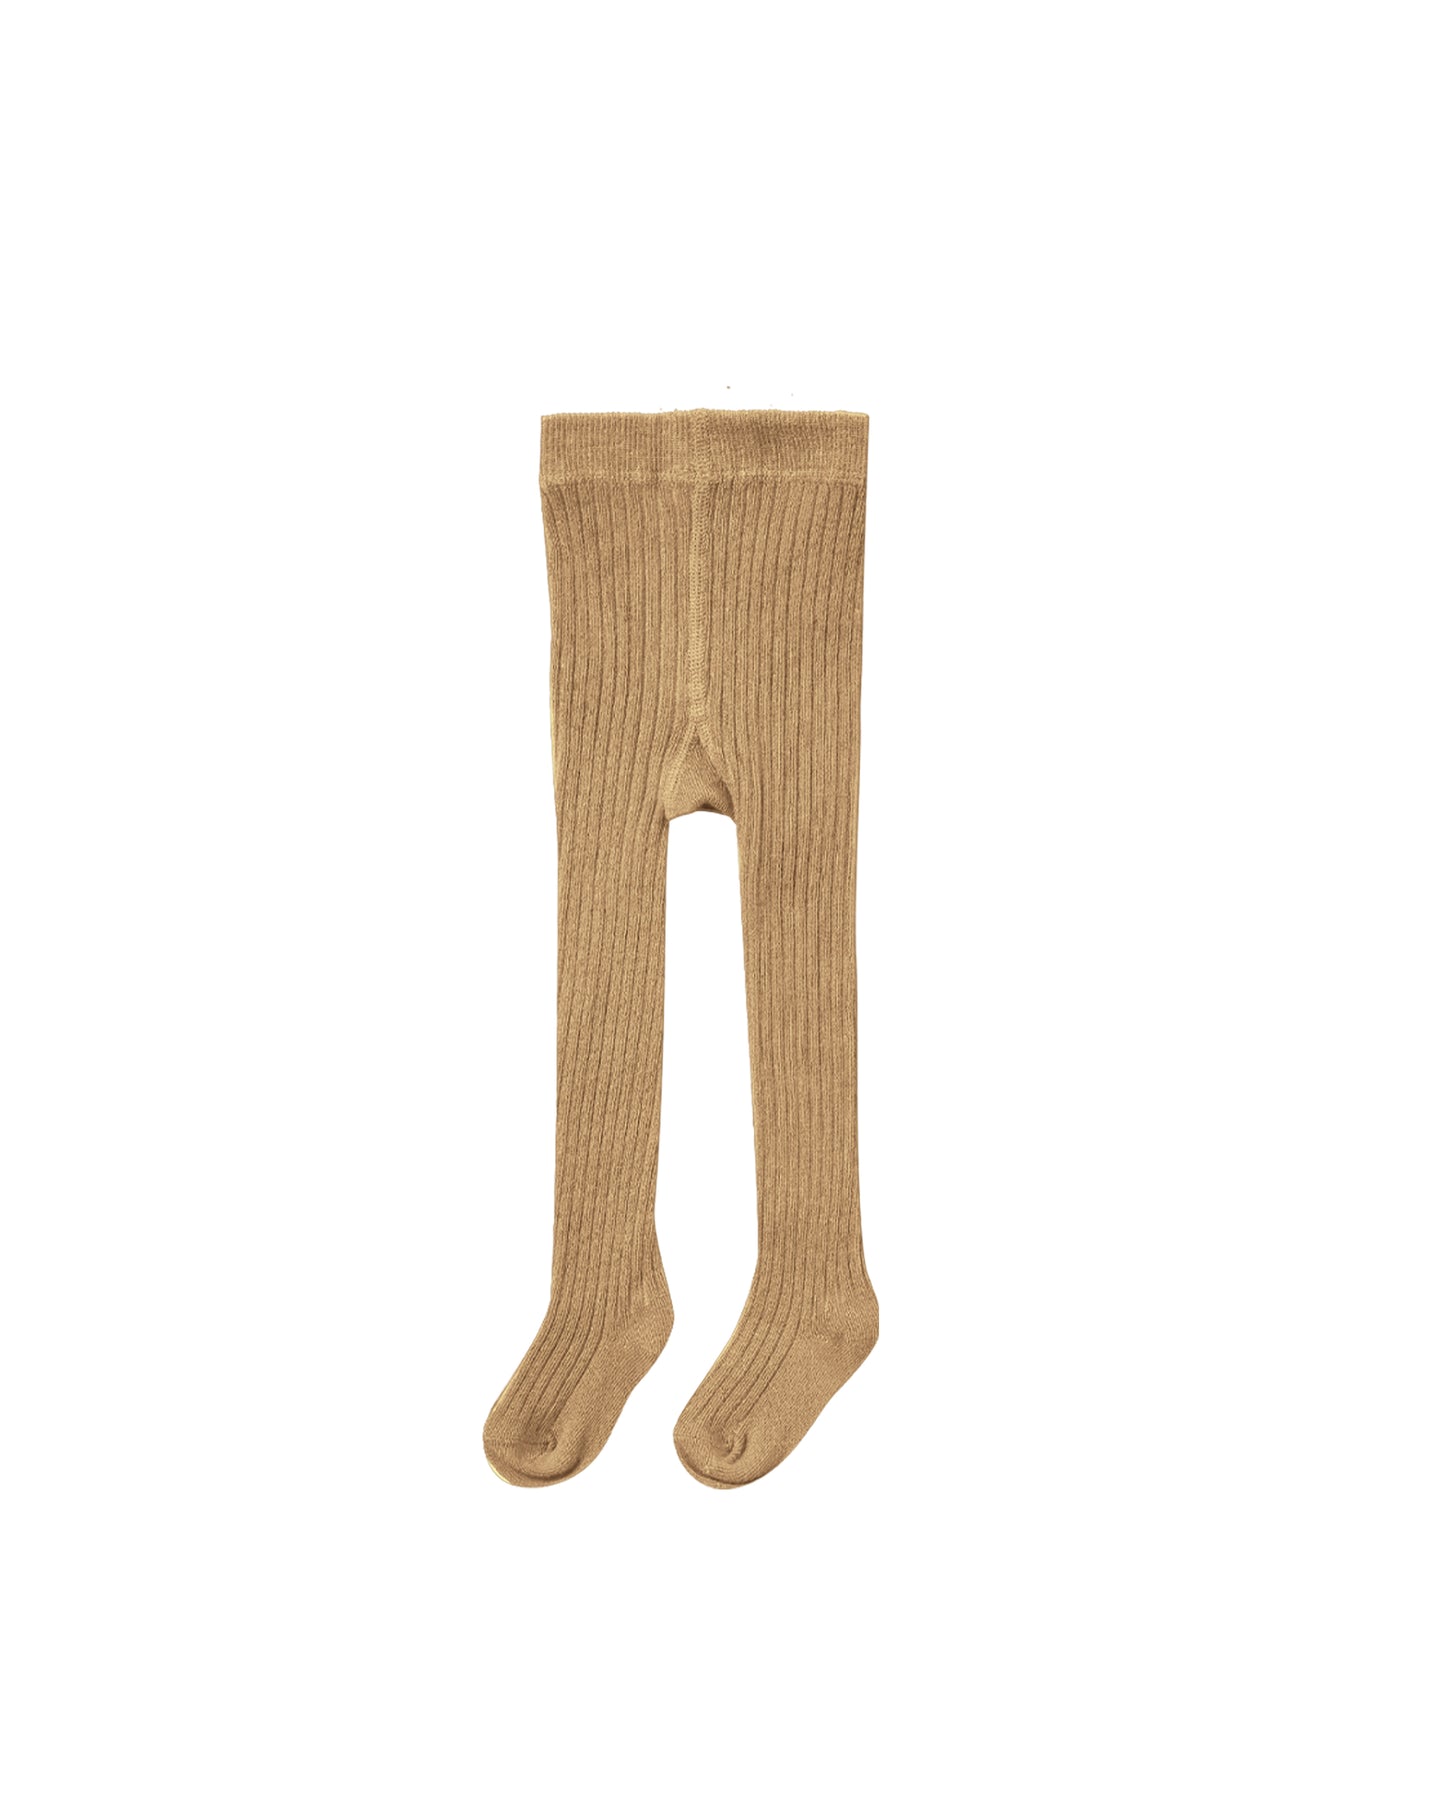 SALE - Quincy Mae Ribbed Tights - Multiple Colors Available